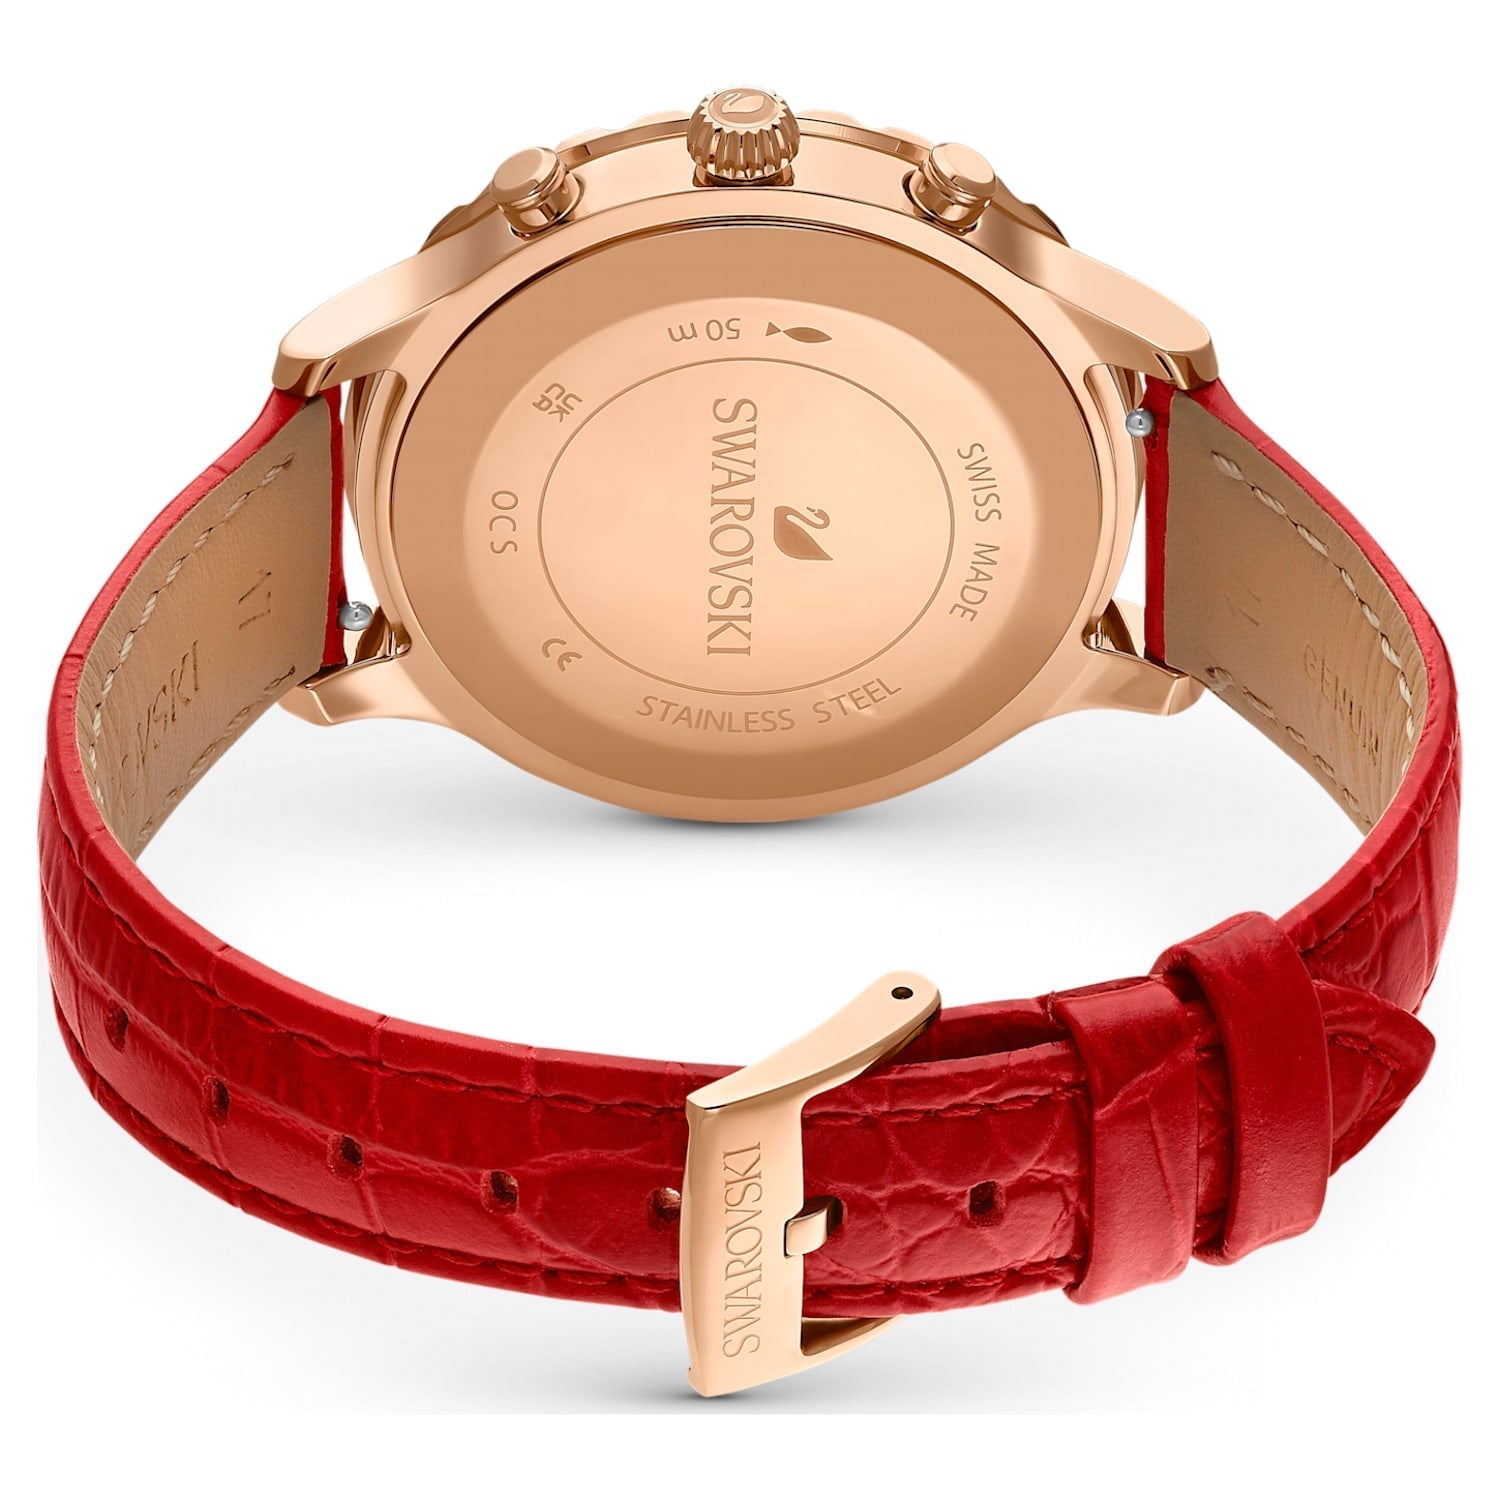 Swarovski Octea Lux Chrono Red Dial Red Leather Strap Watch for Men - 5646975